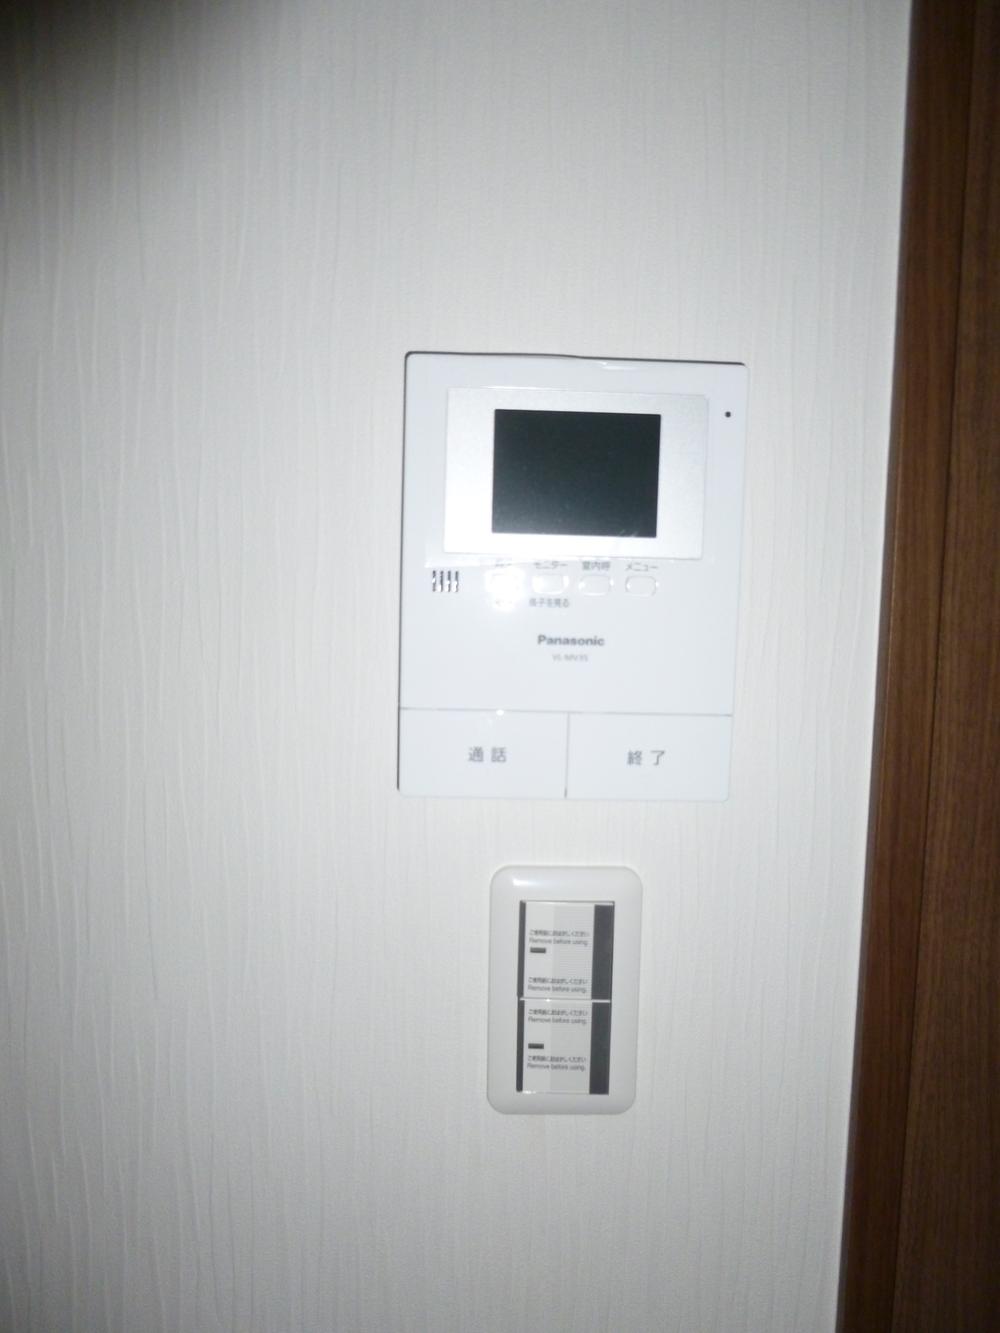 Other. Also you can see the face intercom